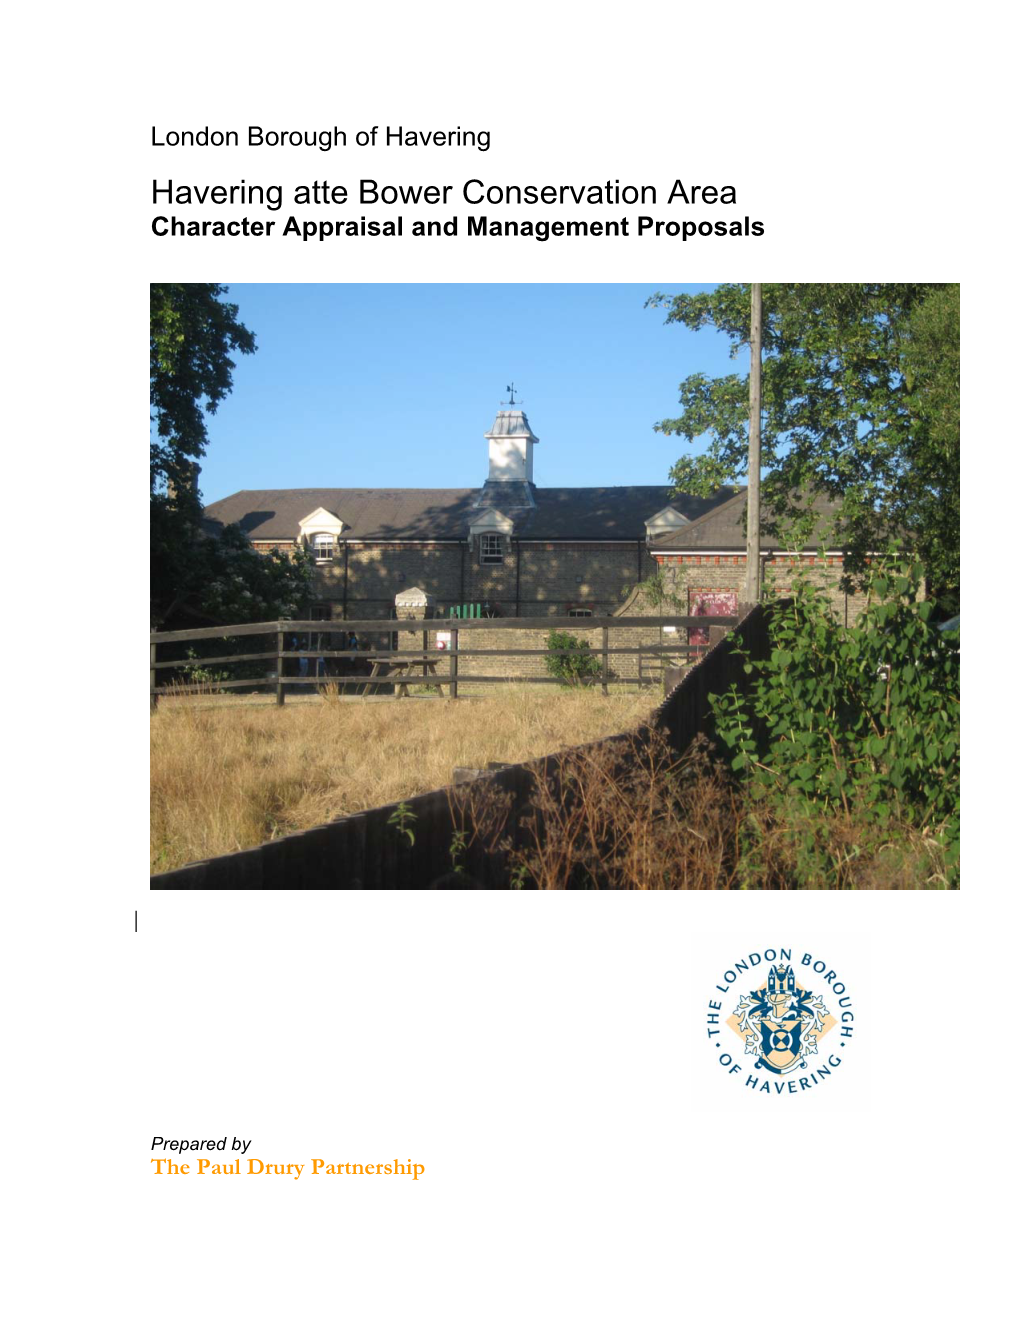 Havering Atte Bower Conservation Area Character Appraisal and Management Proposals